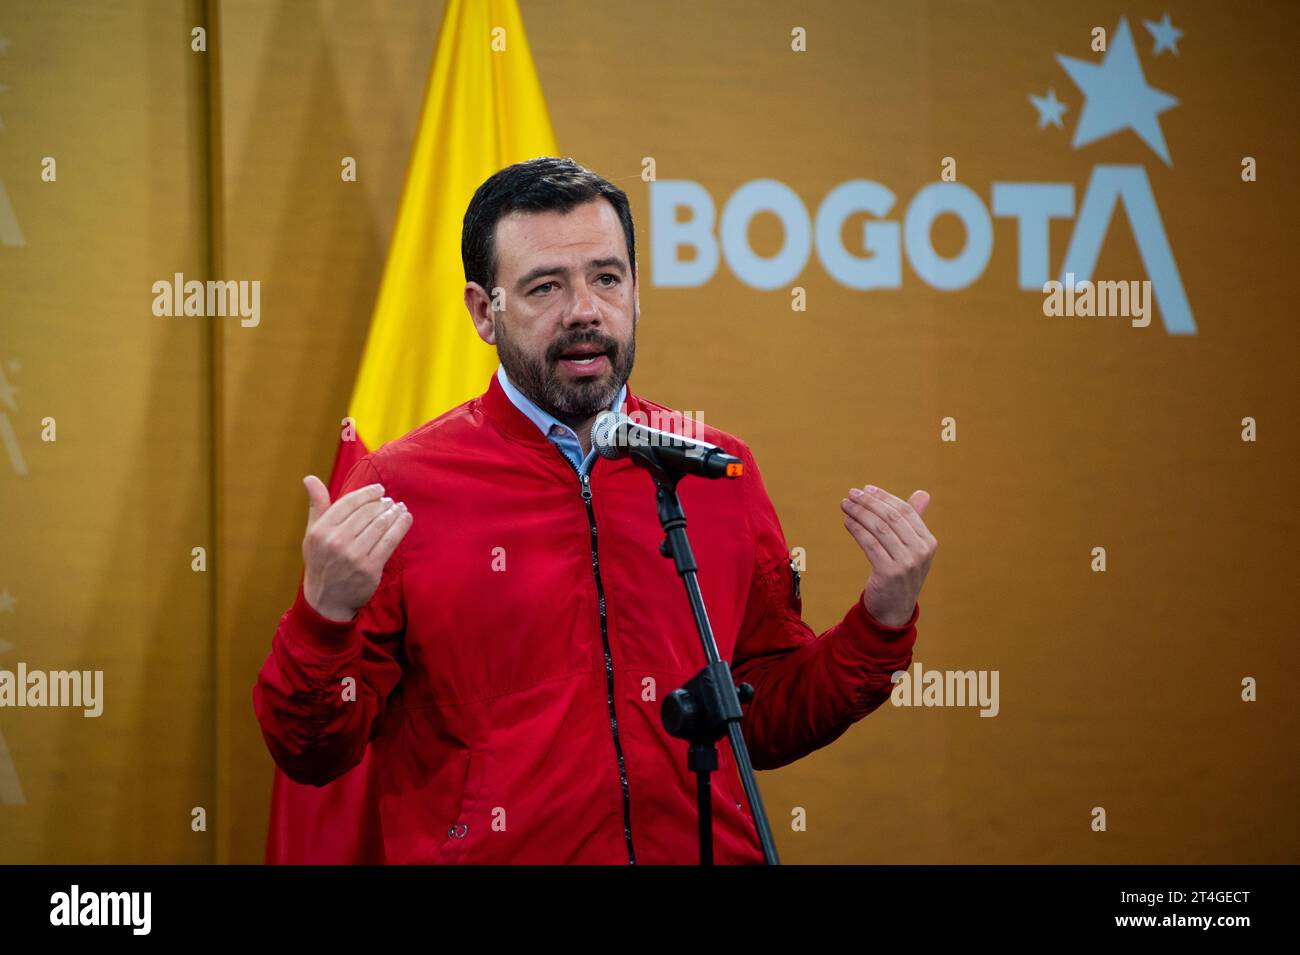 Bogota, Colombia. 30th Oct, 2023. Bogota's mayor-elect Carlos Fernando Galan during a press conference after a meeting between the Bogota's mayor Claudia Lopez and mayor-elect Carlos Fernando Galan, in Bogota, Colombia, october 30, 2023. Photo by: Chepa Beltran/Long Visual Press Credit: Long Visual Press/Alamy Live News Stock Photo